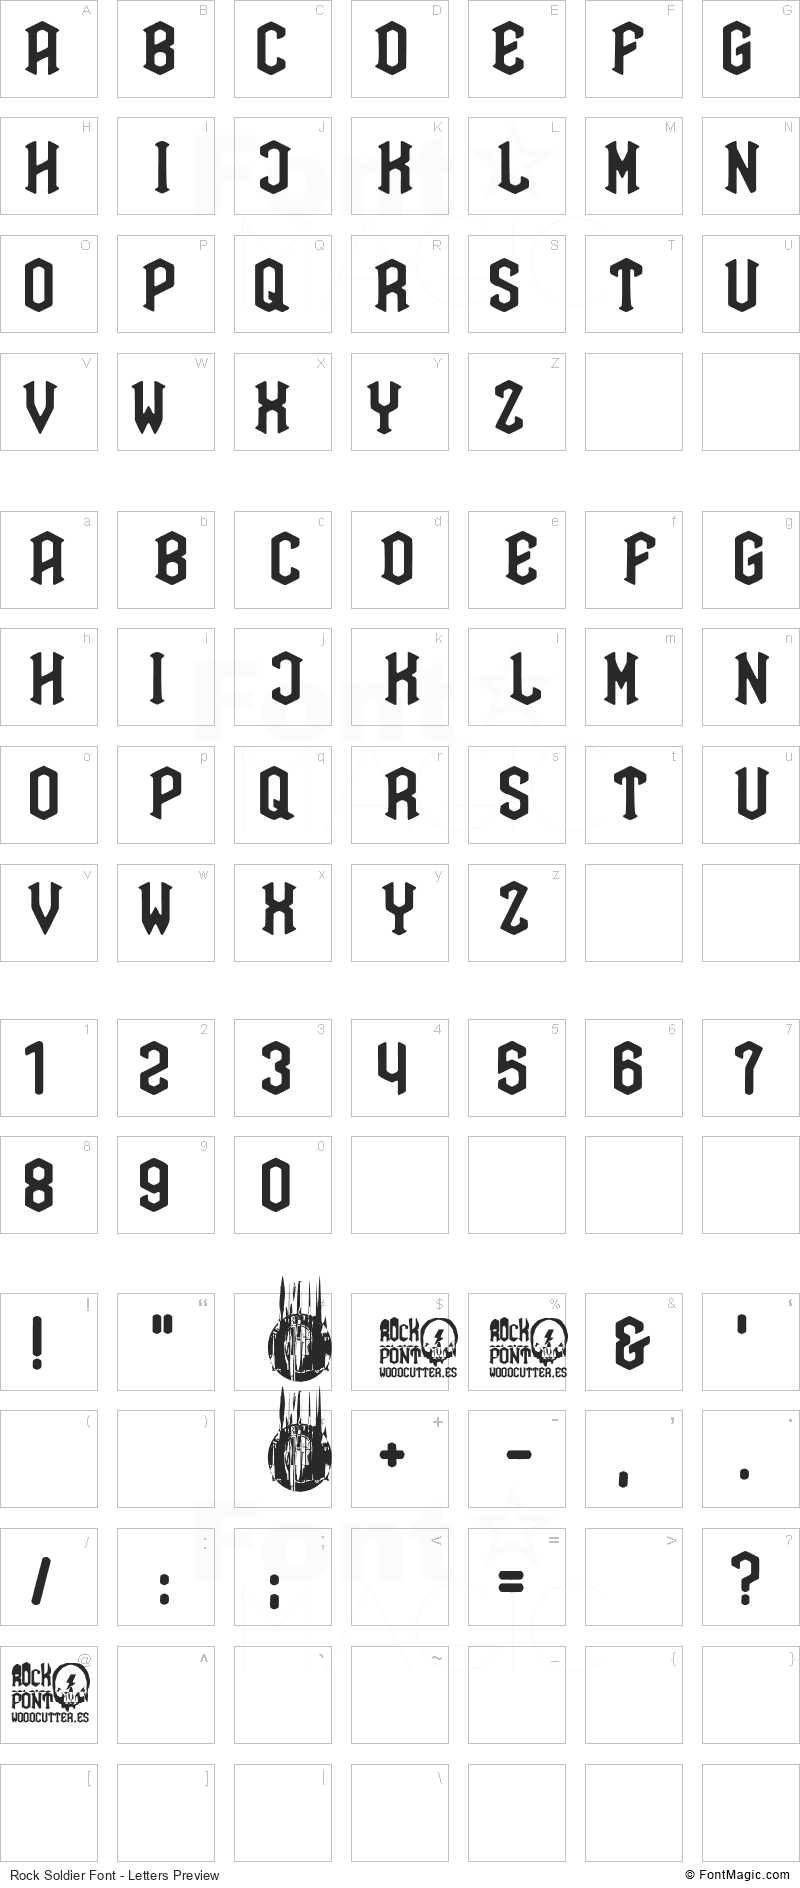 Rock Soldier Font - All Latters Preview Chart